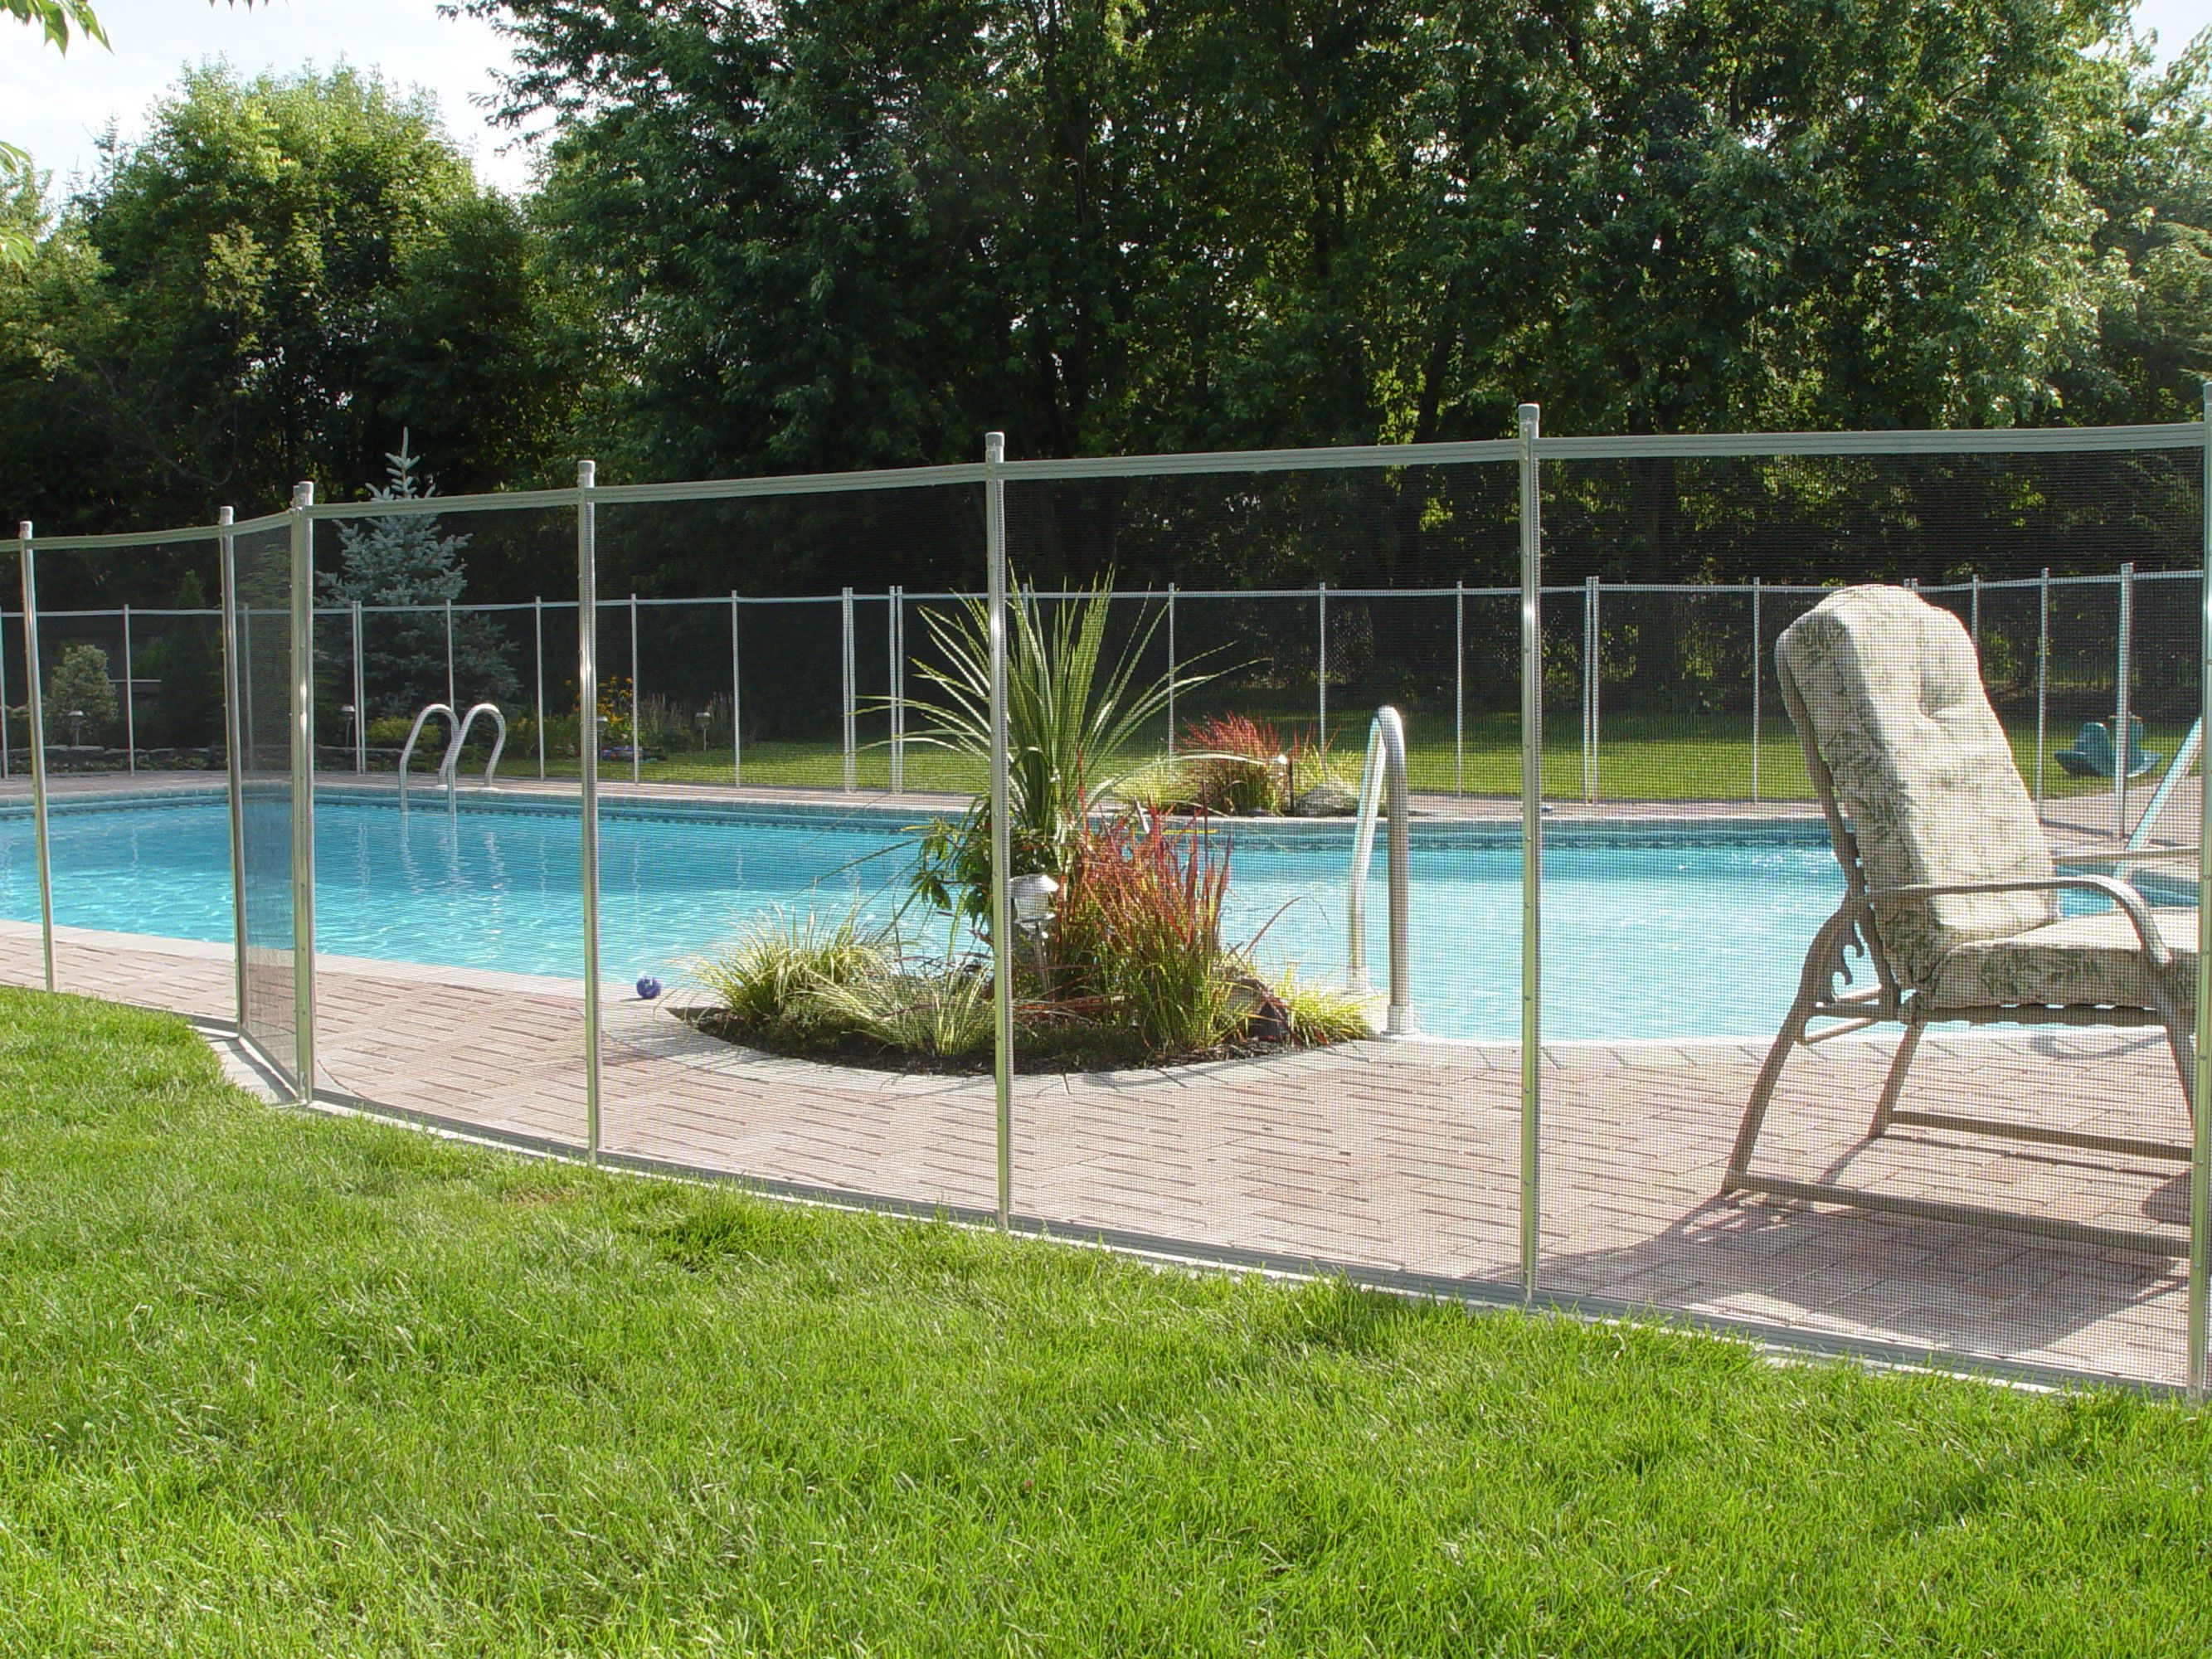 9 Amazing Pool Fence Ideas Providing Safety And Protection For Your Property Interior Design